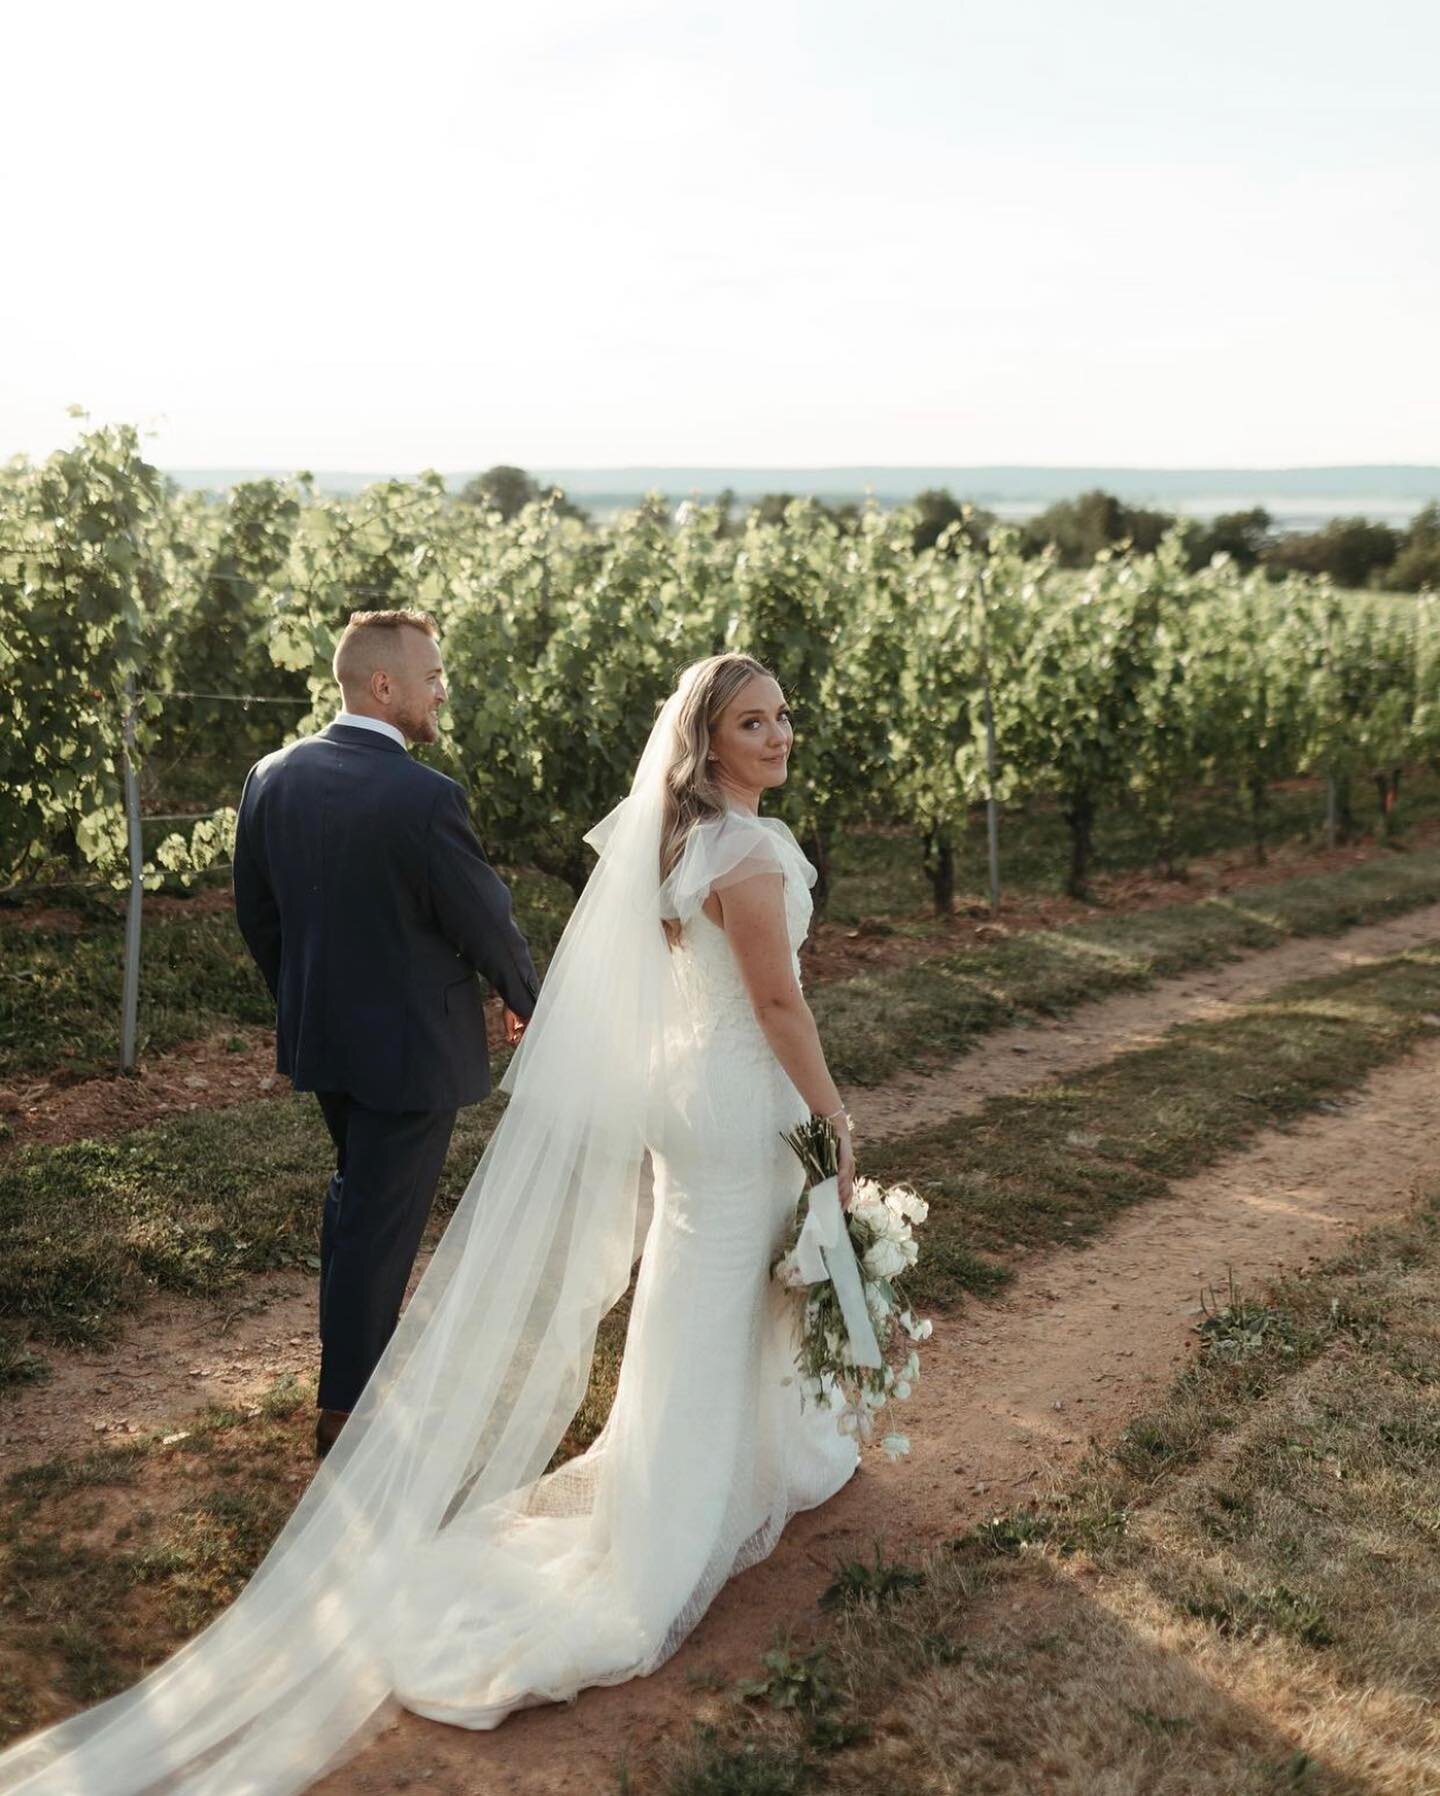 Our beautiful bride Mallory and her dreamy vineyard wedding 🤍

@malloryysoder
@jwellsphotography 
@lwwines 
@allisonkirbyy 
@thelox.ca 
@carrieburgess_